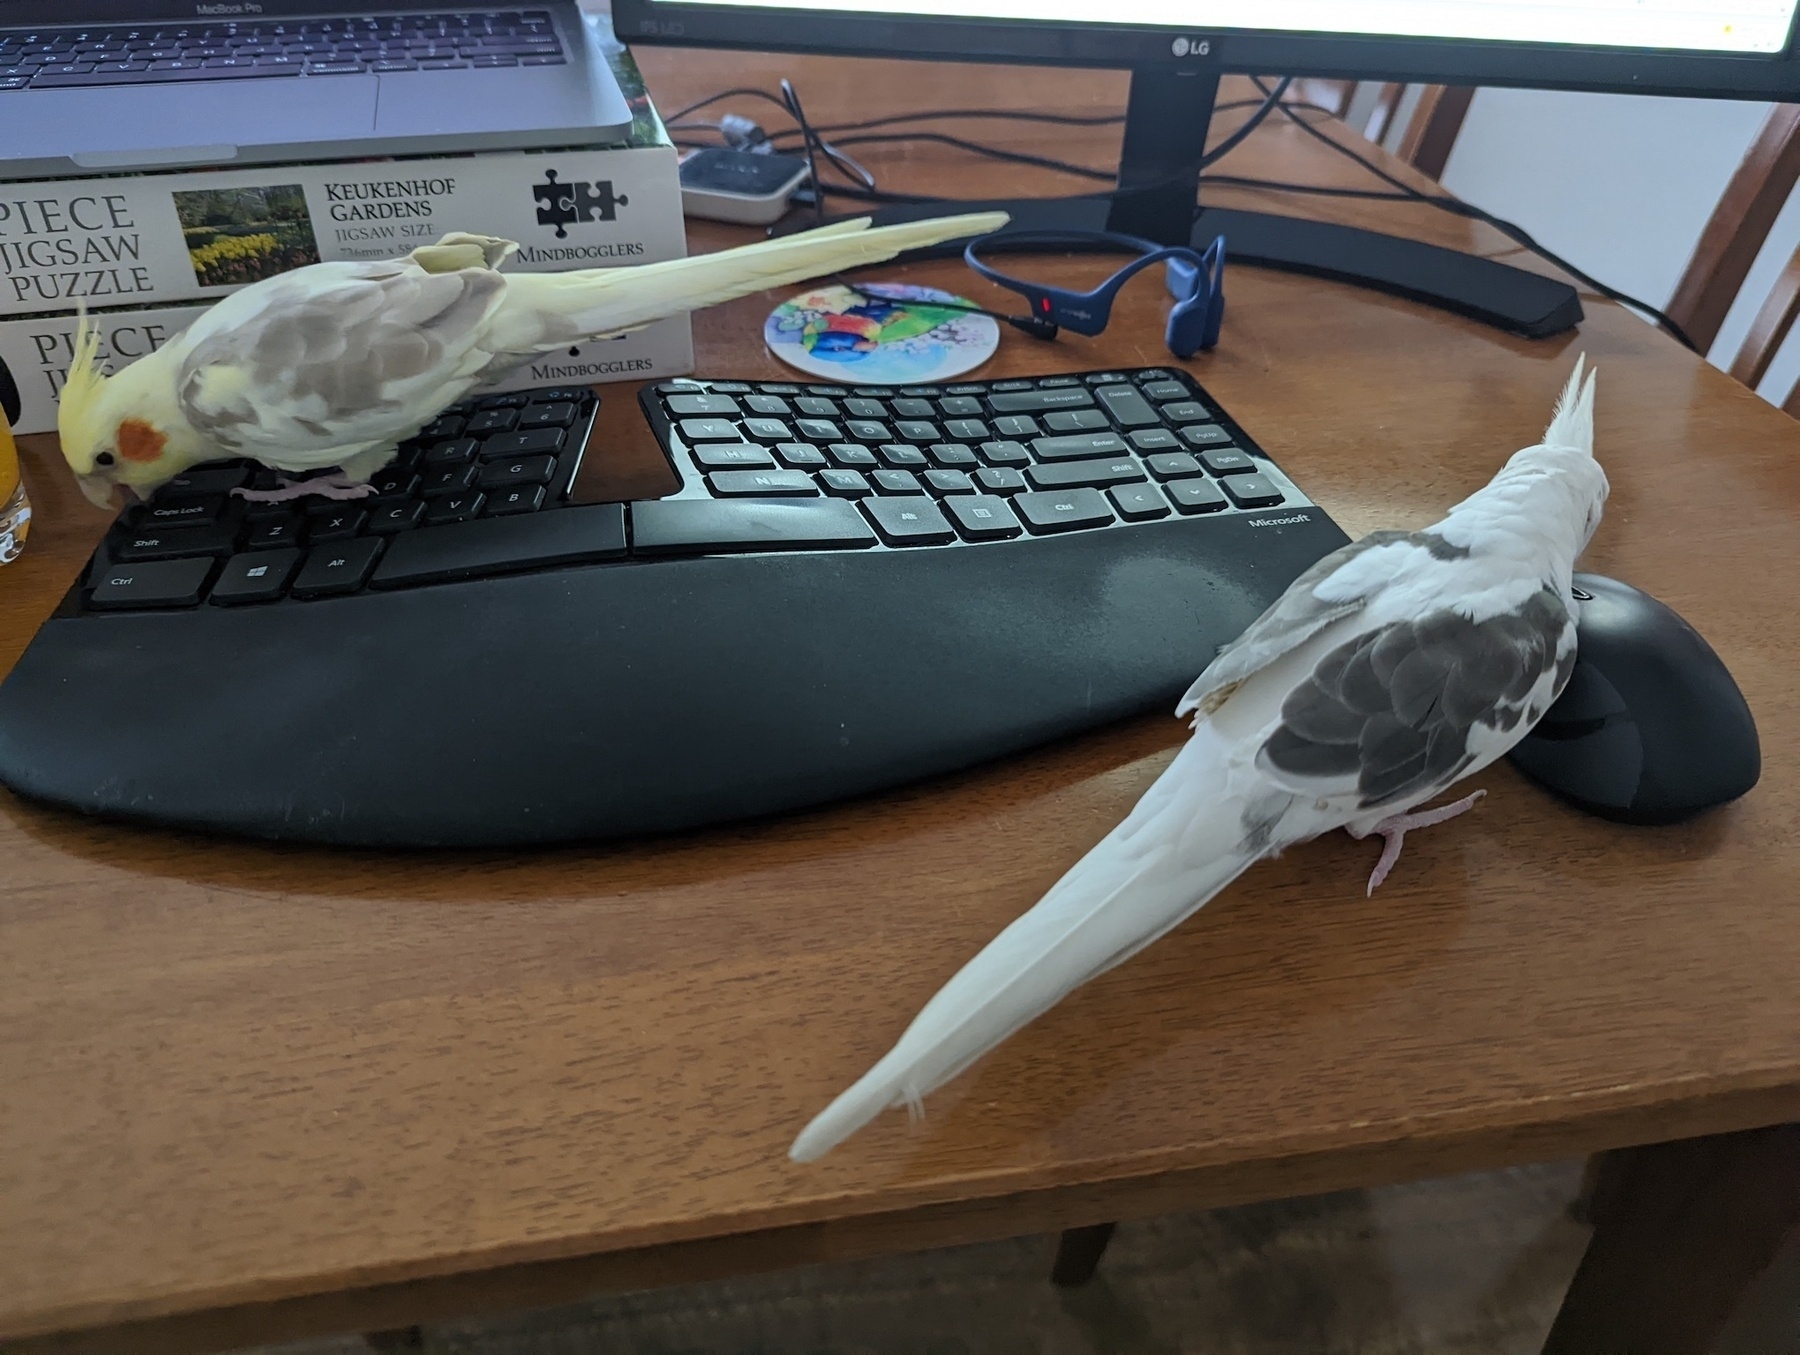 Cockatiels on keyboard and mouse